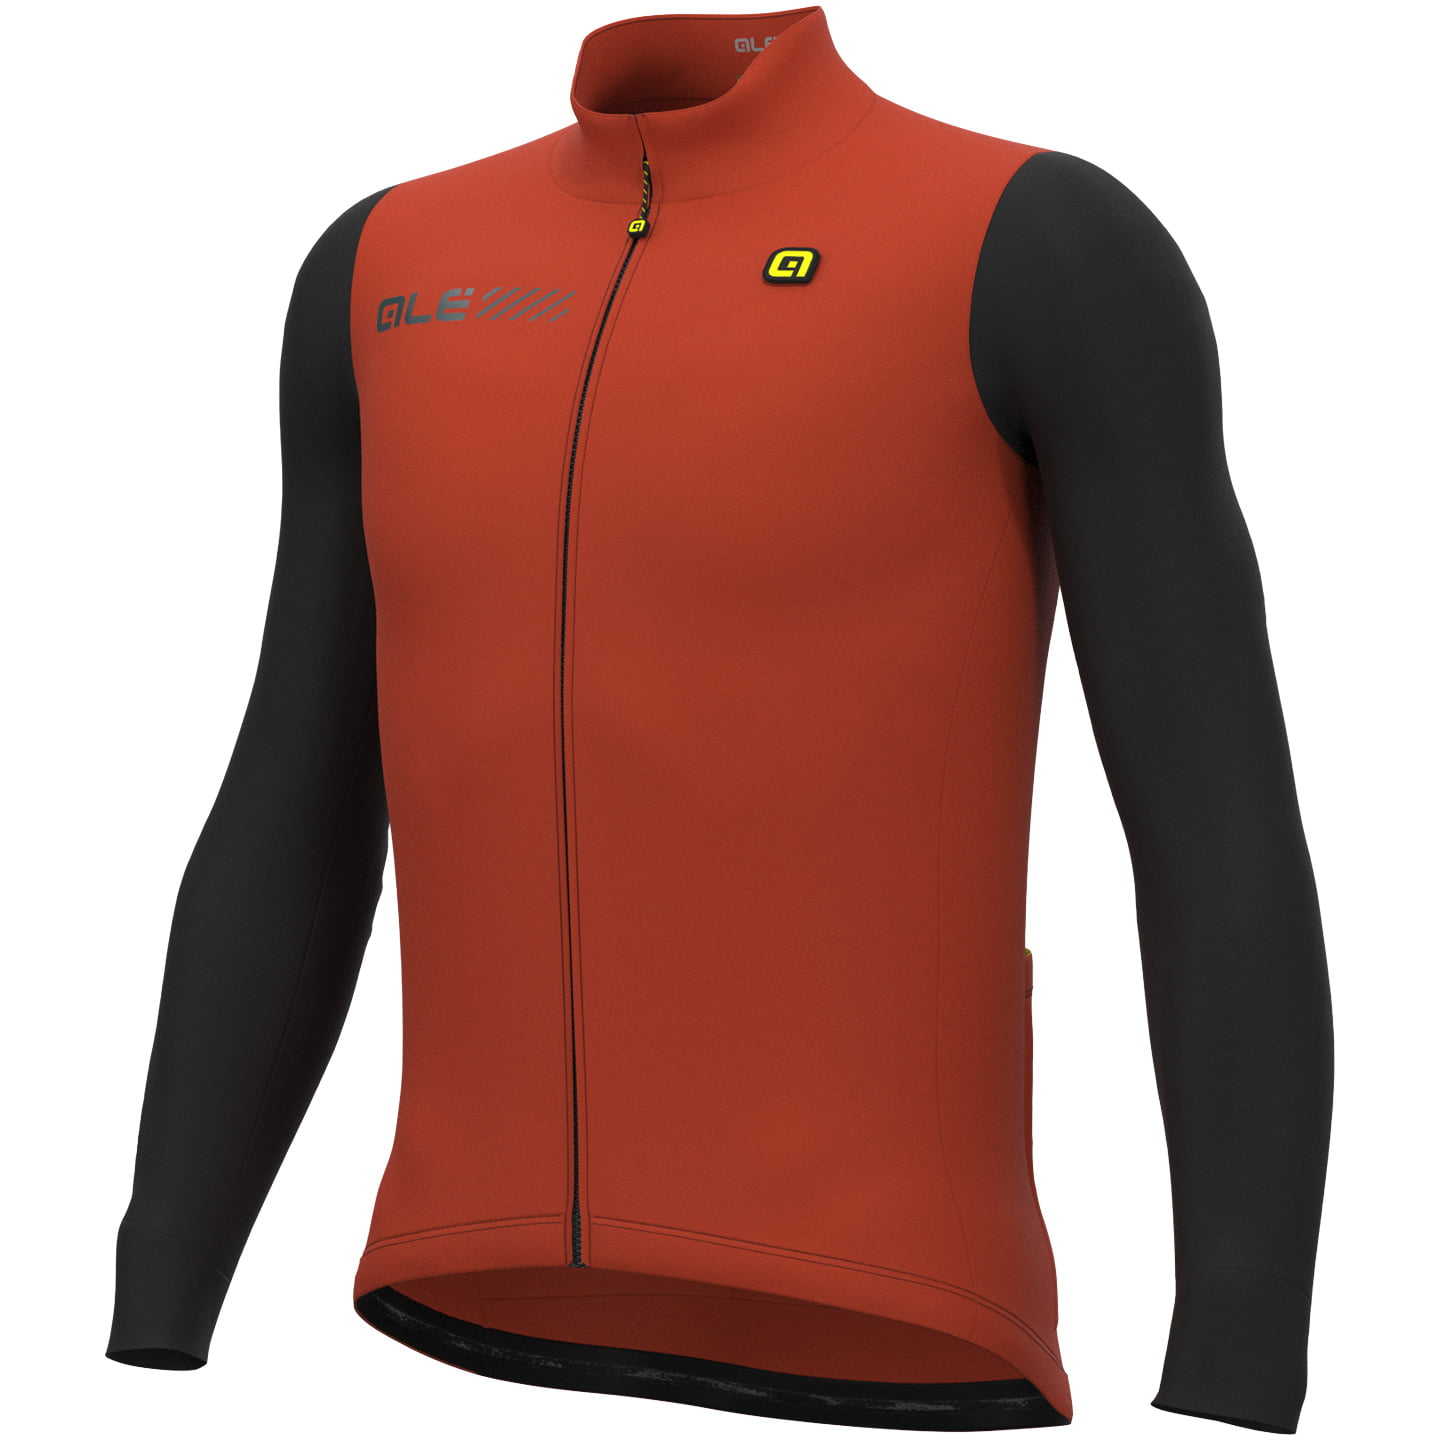 ALE Fondo 2.0 Long Sleeve Jersey Long Sleeve Jersey, for men, size M, Cycling jersey, Cycling clothing